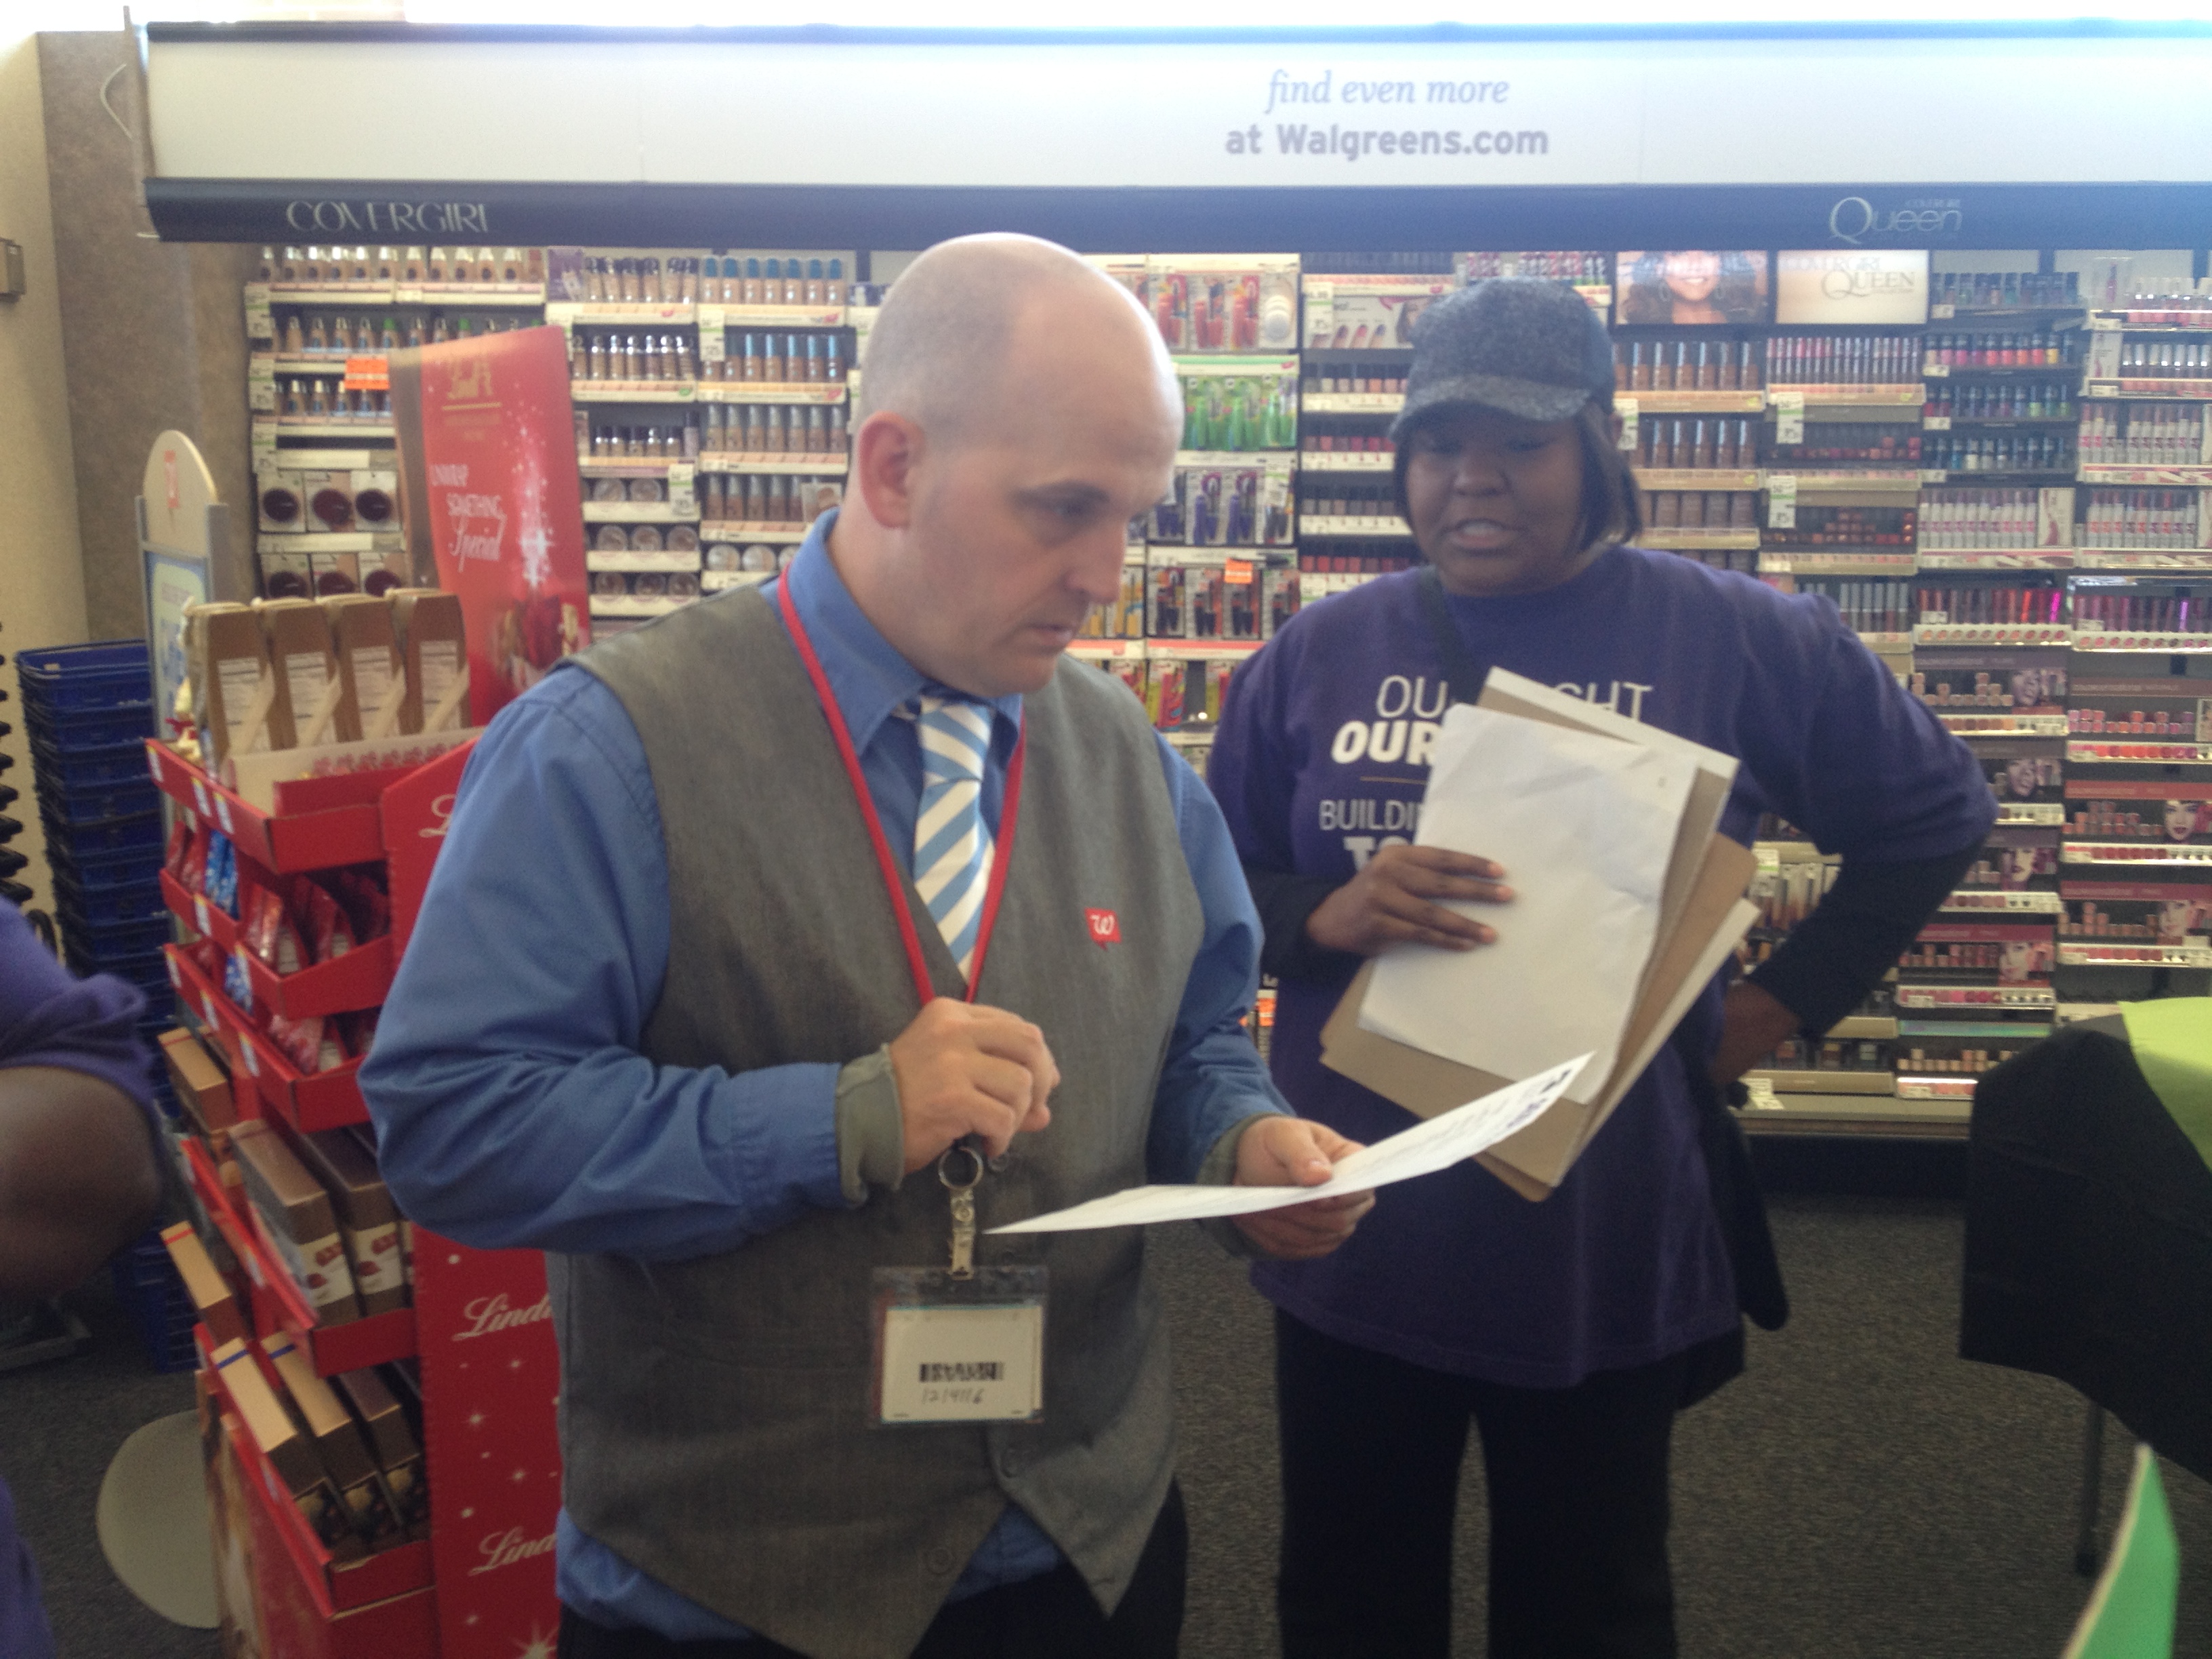 Walgreens_Manager_w_letter_fair_tax_boom_camp_11_01_13